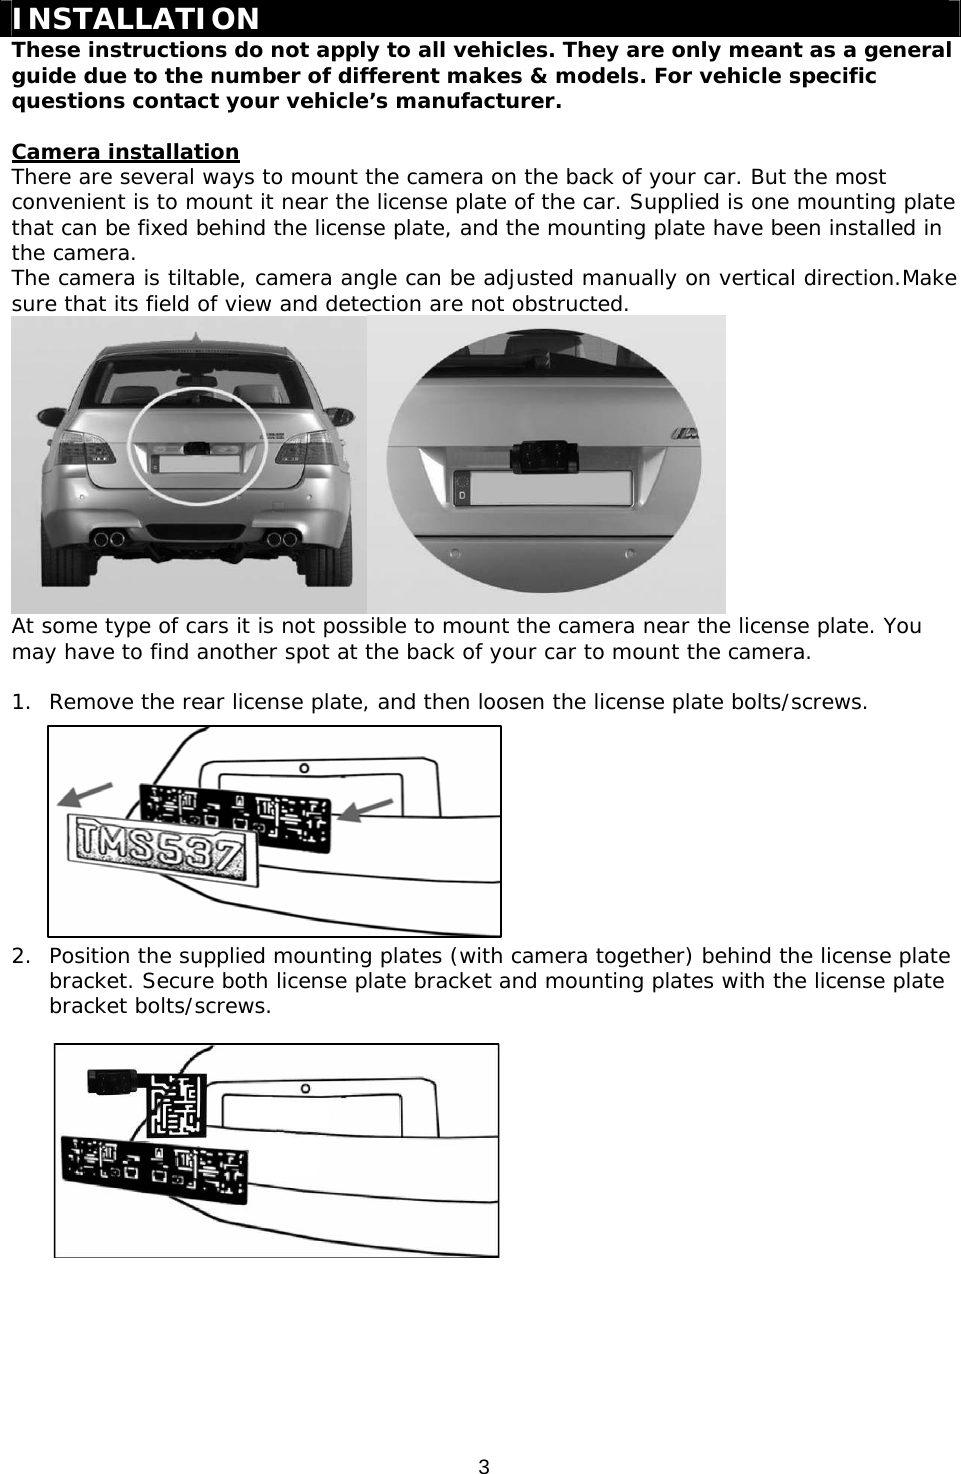 3   INSTALLATION These instructions do not apply to all vehicles. They are only meant as a general guide due to the number of different makes &amp; models. For vehicle specific questions contact your vehicle’s manufacturer.  Camera installation There are several ways to mount the camera on the back of your car. But the most convenient is to mount it near the license plate of the car. Supplied is one mounting plate that can be fixed behind the license plate, and the mounting plate have been installed in the camera.  The camera is tiltable, camera angle can be adjusted manually on vertical direction.Make sure that its field of view and detection are not obstructed.  At some type of cars it is not possible to mount the camera near the license plate. You may have to find another spot at the back of your car to mount the camera.  1. Remove the rear license plate, and then loosen the license plate bolts/screws.          2. Position the supplied mounting plates (with camera together) behind the license plate bracket. Secure both license plate bracket and mounting plates with the license plate bracket bolts/screws.         